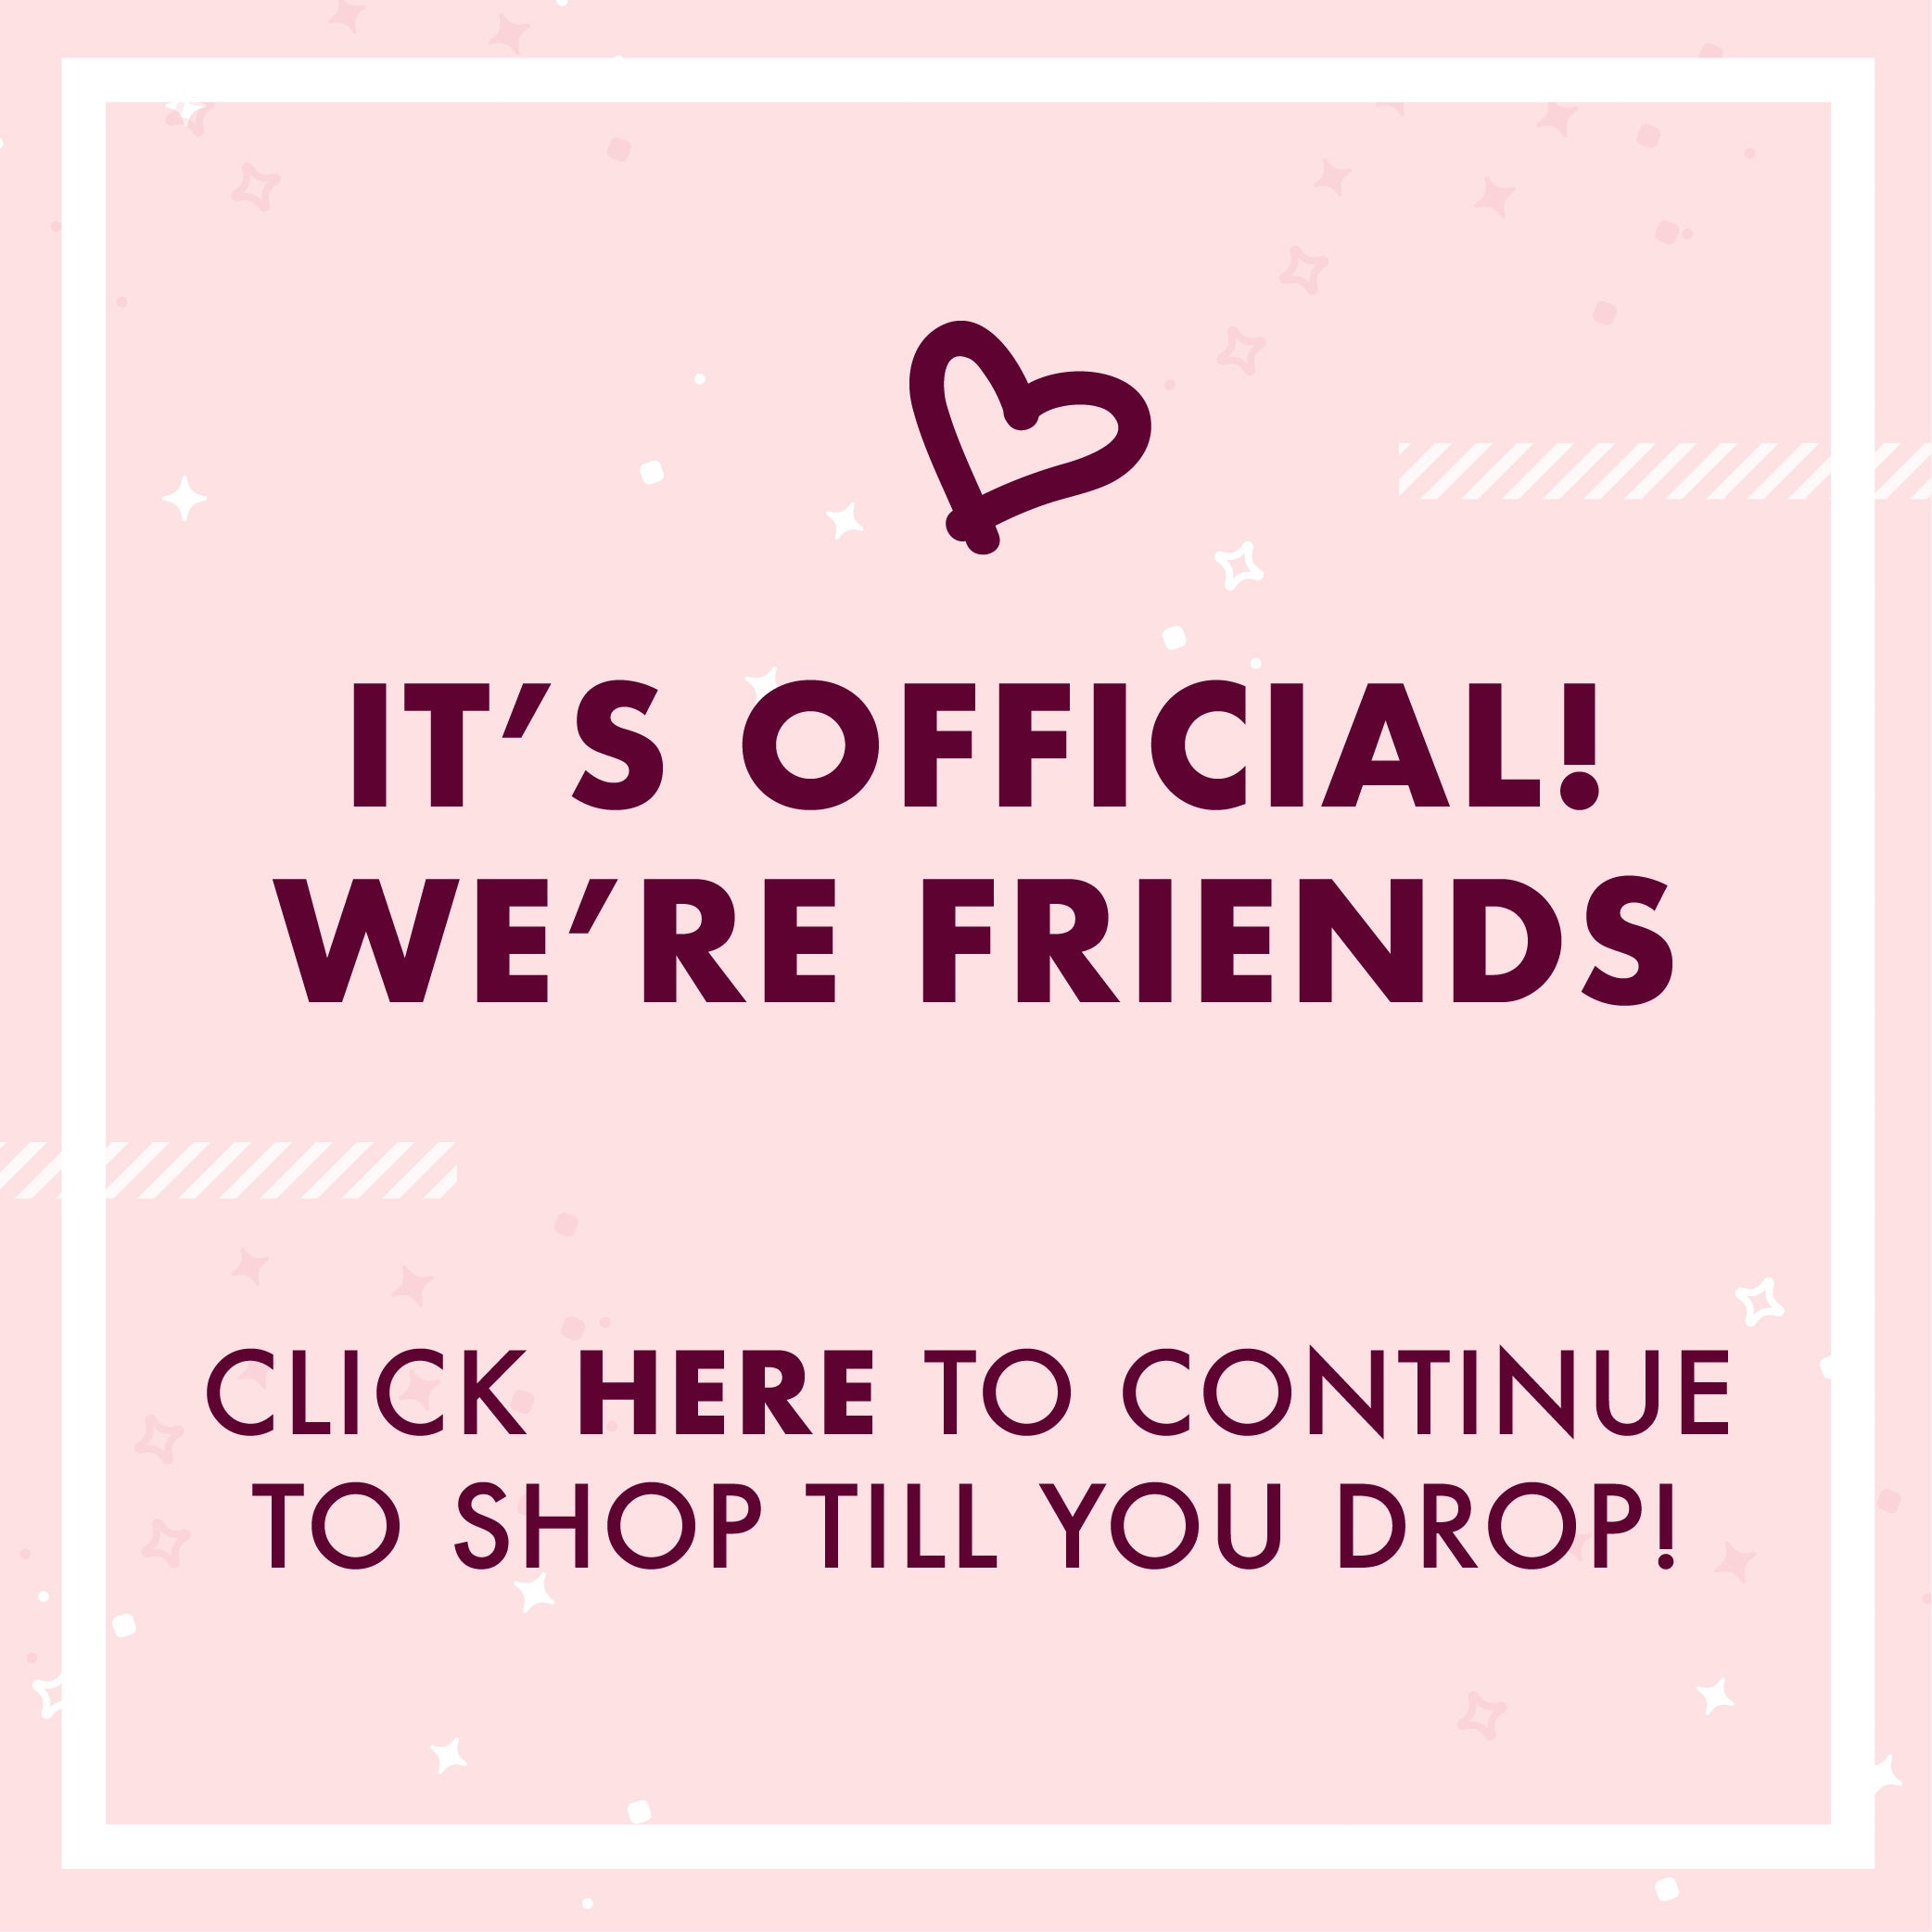 It's official, we're friends. Clicks here to continue to shop till you drop!